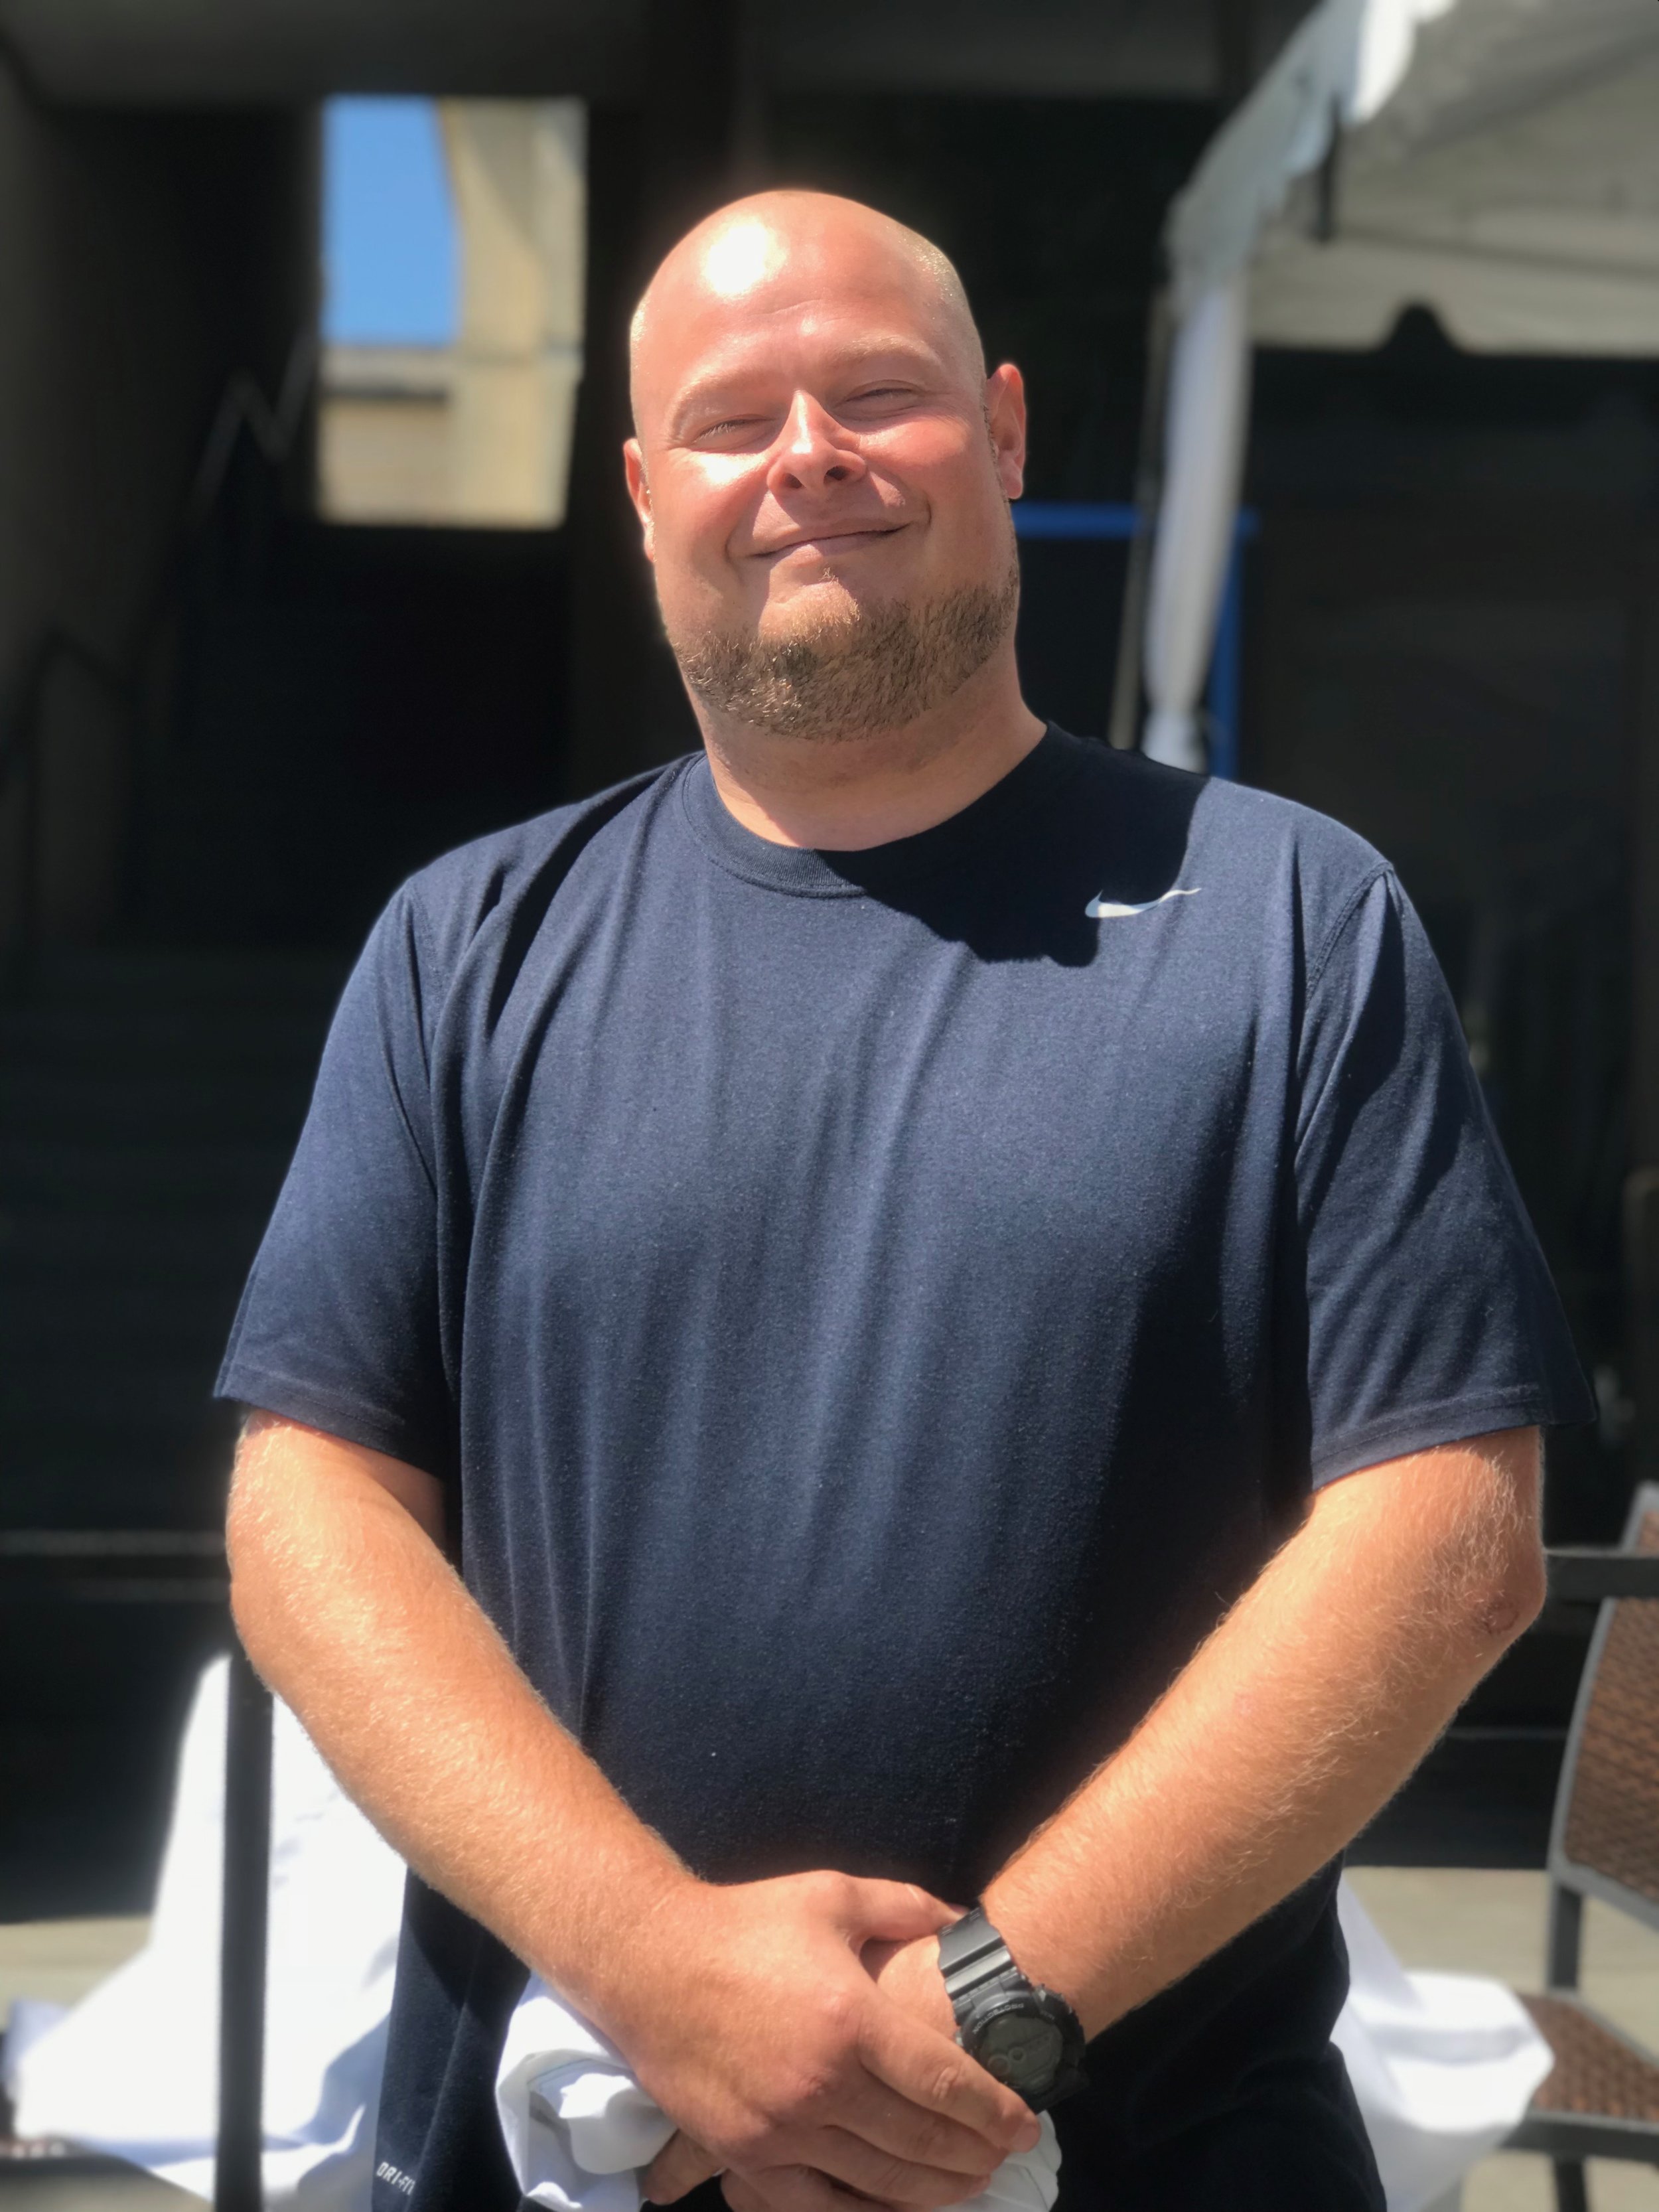  Ed Knott, Chef De Partie/ Sous Chef  Born and Raised in Maryland, Ed has been a part of the Gertrude's Family for over a decade. Before he came to Gertrude's Ed honed his skills at many of Baltimore's iconic restaurants such as Joy America, Sisson's